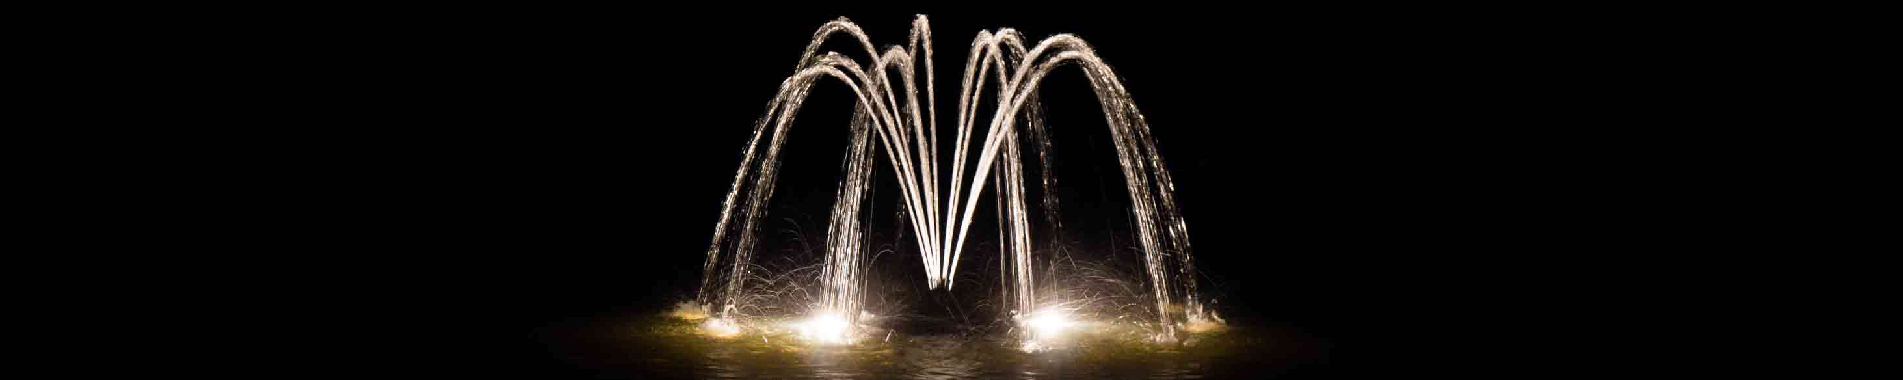 Lake Management Floating Fountains Aeration Irrigation Pump Systems Dallas Fort Worth Texas